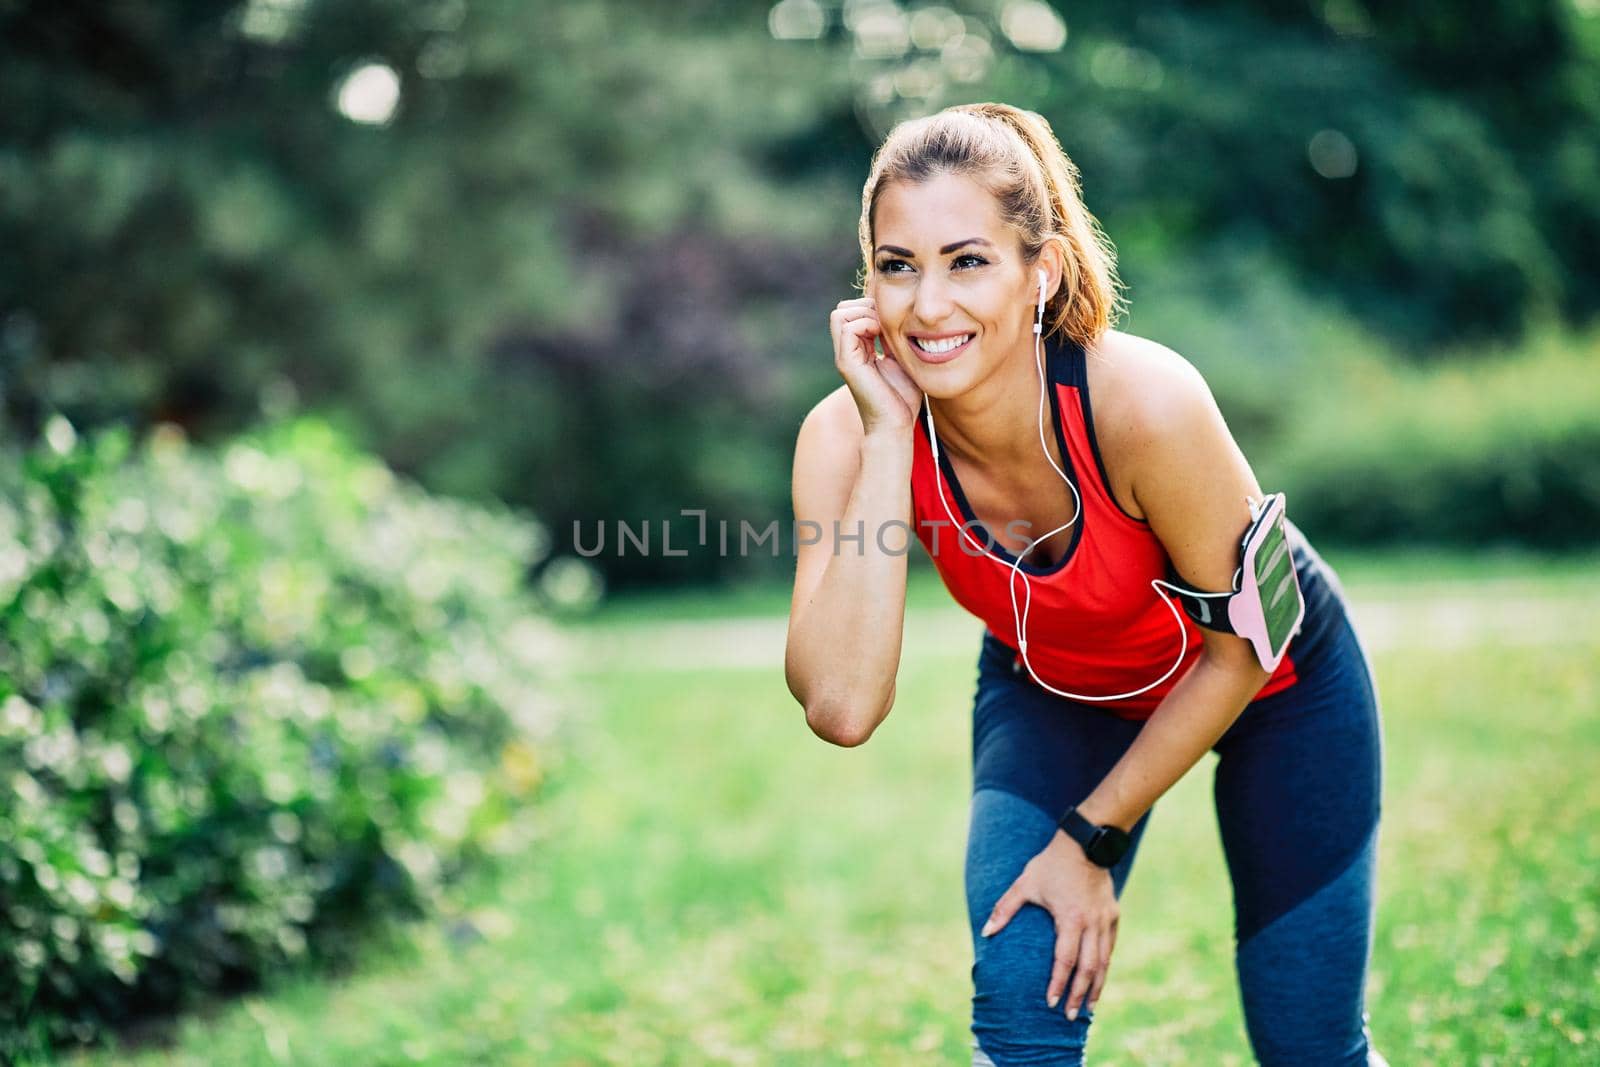 Portrait of a young fitness woman exercising in a park outdoors